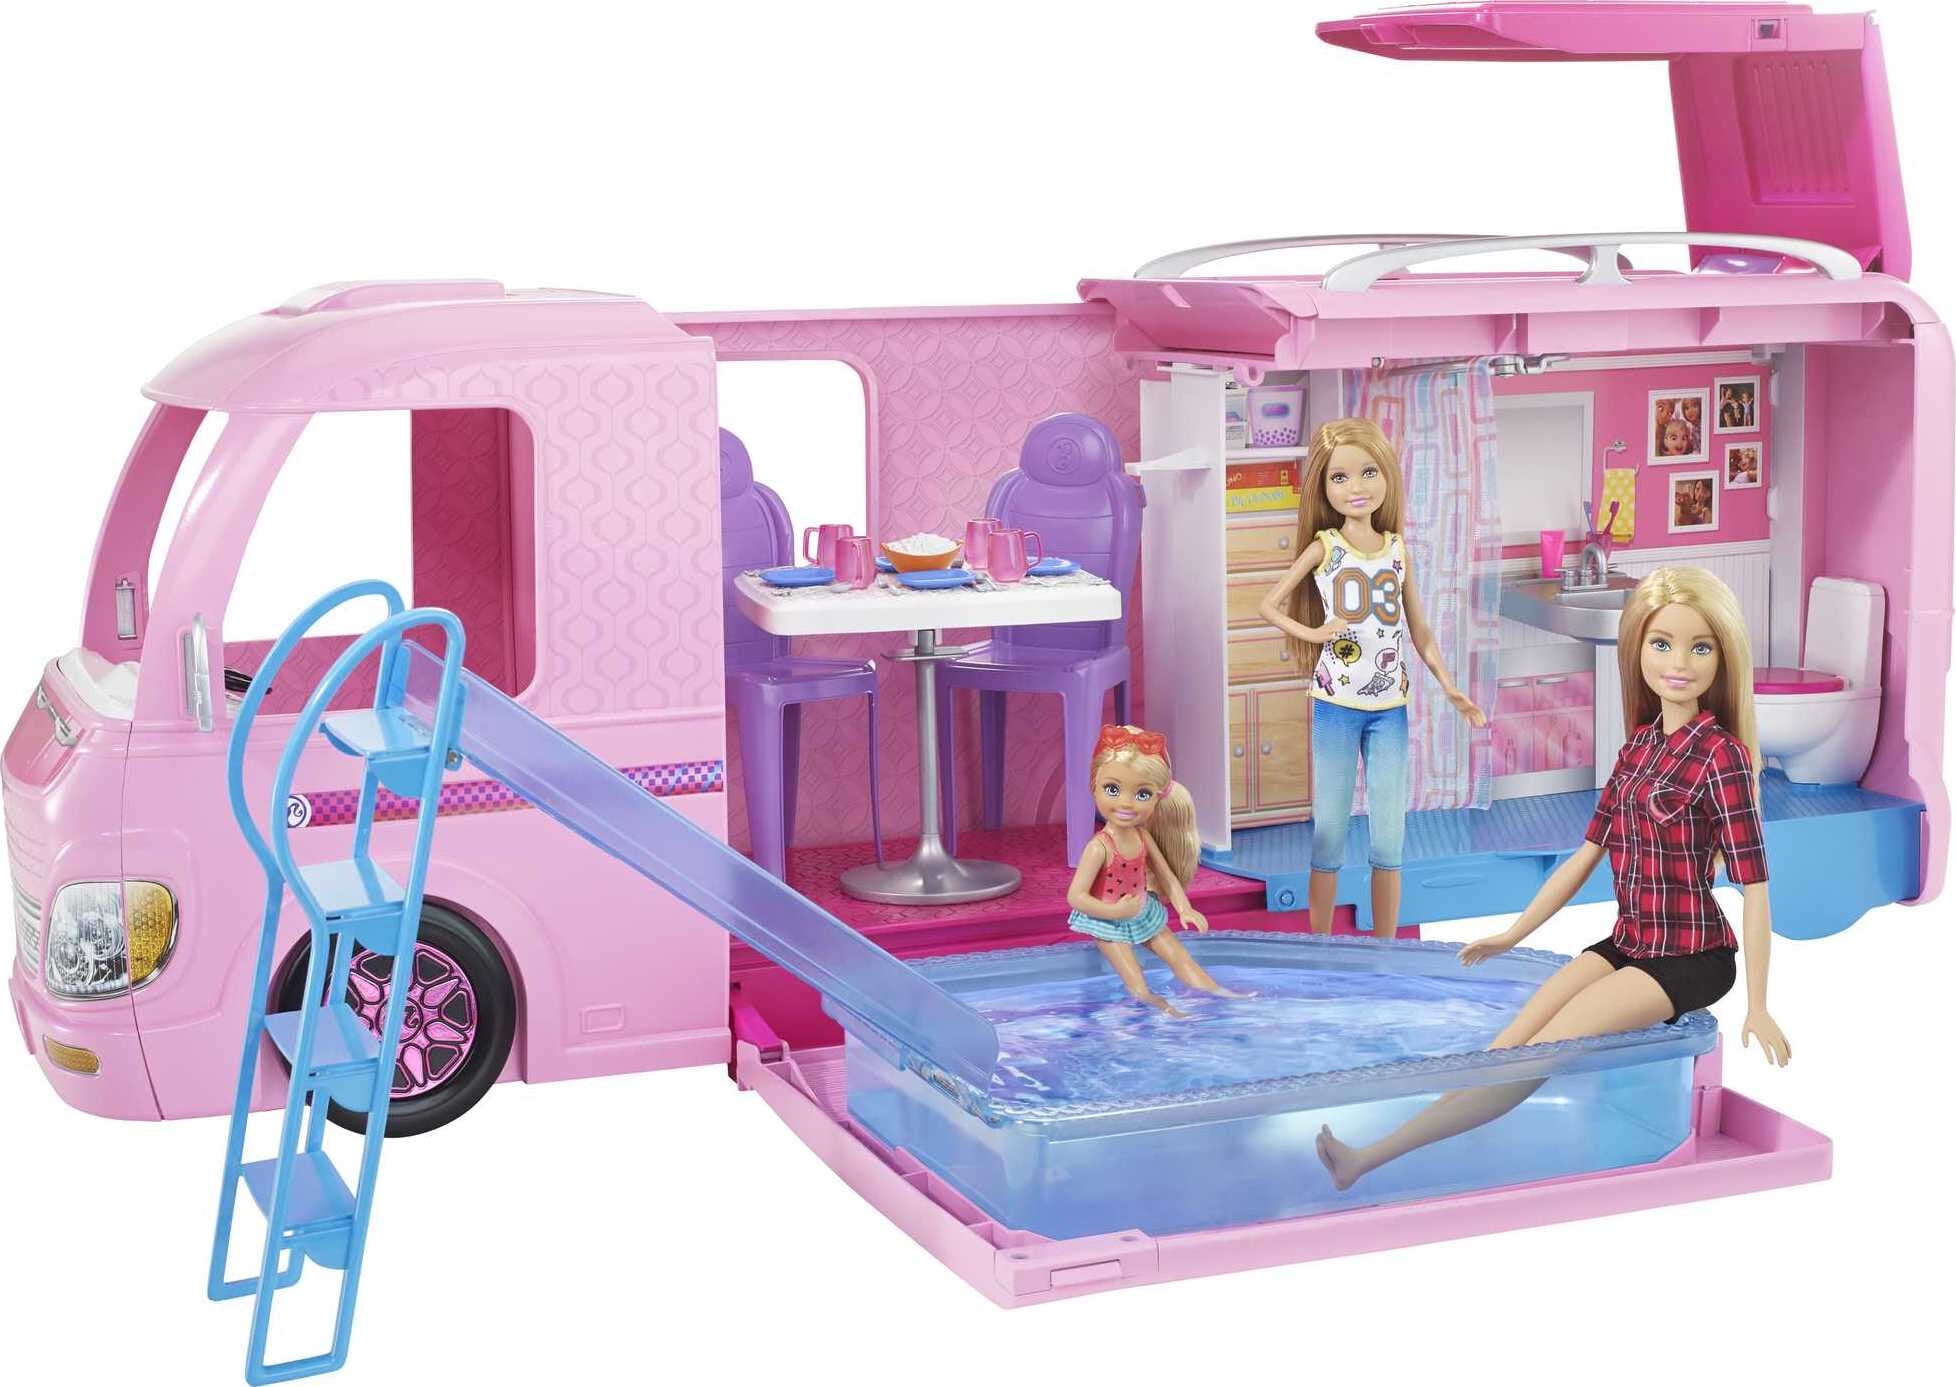 Tips on where to find barbie compatible fishing and camping accessories  beyond a barbie camping set? (We have them already. Unrelated pic for  attention) : r/Barbie